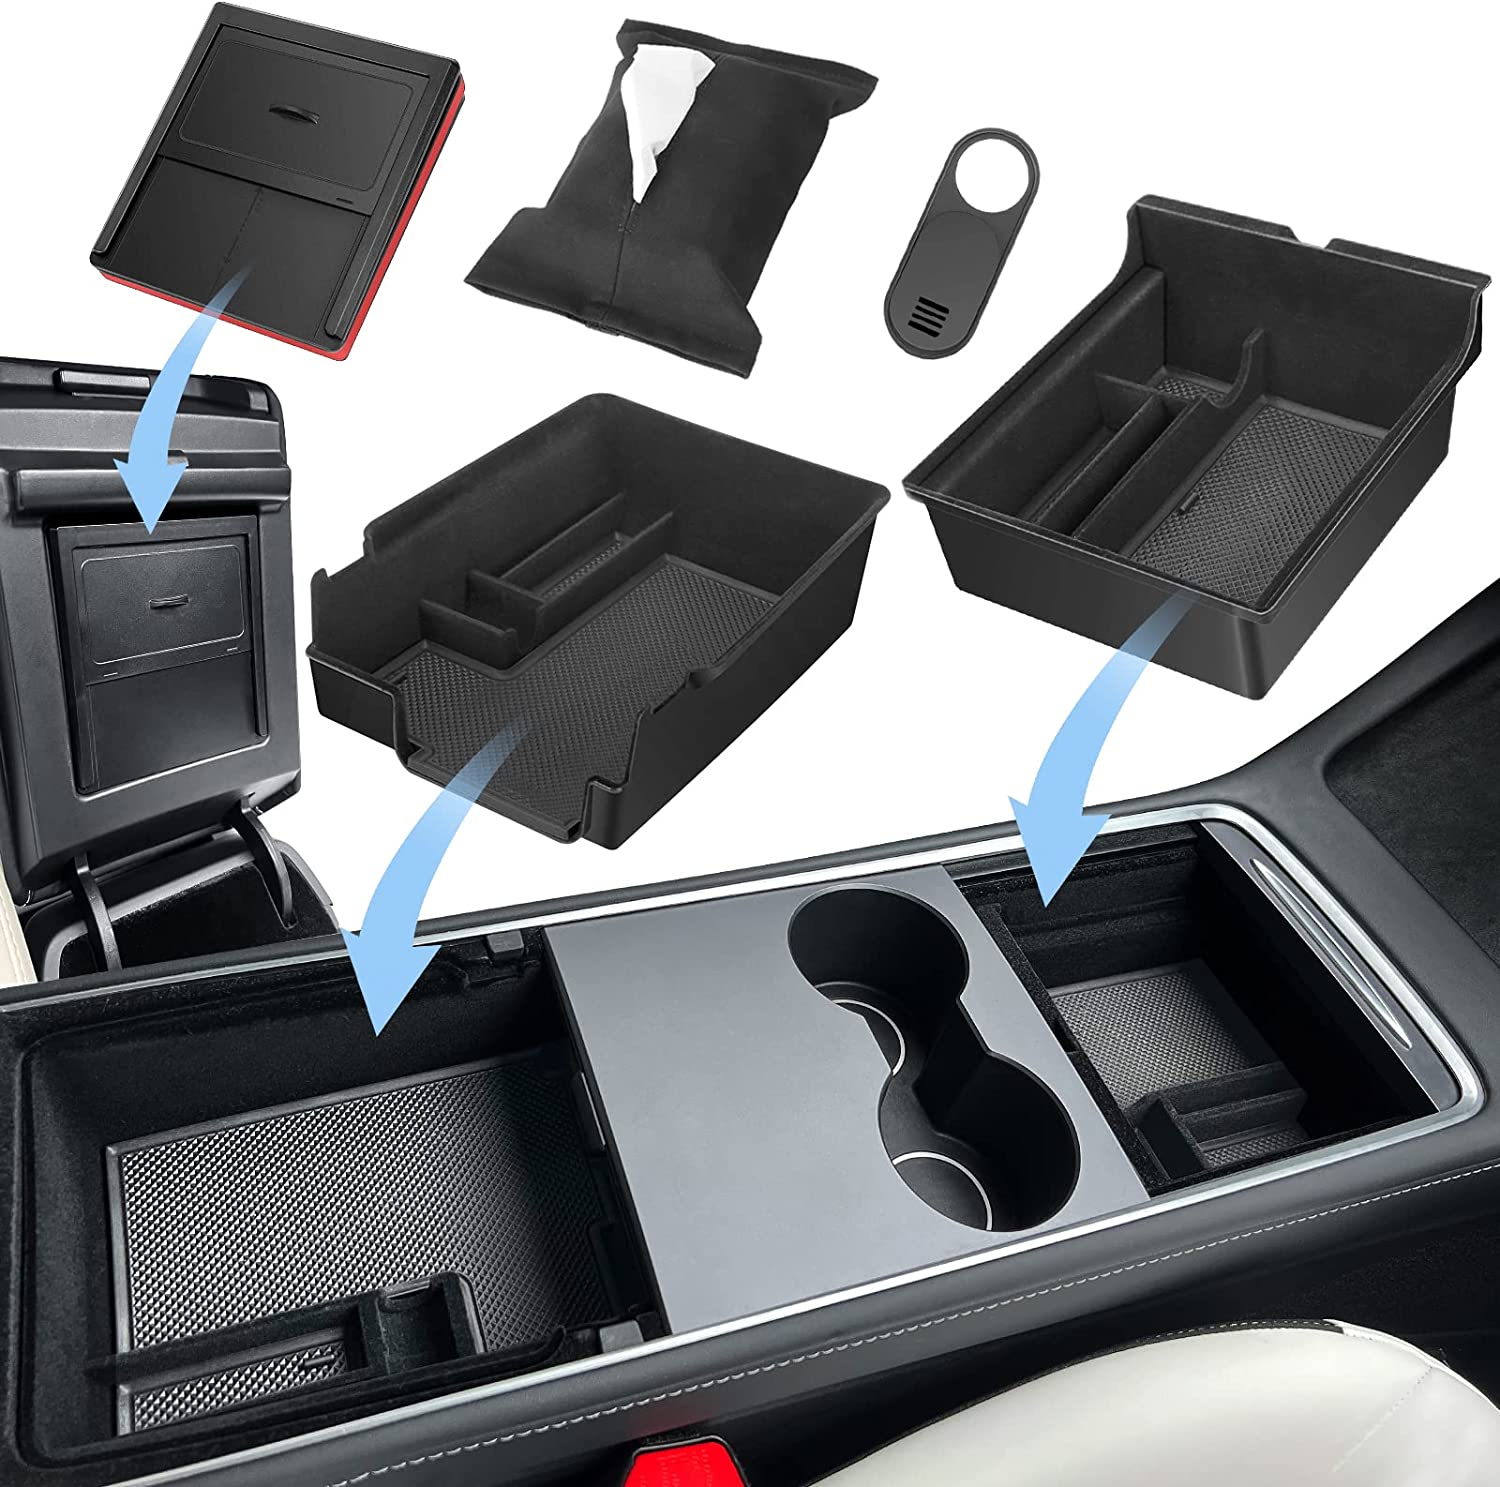 (5 Pack) 3PC Upgraded Center Console Organizer Tray Compatible for 2022 2021 Tesla Model 3 Model Y Accessories Flocked/Silicone Armrest Hidden Drawer Storage Box 1PC Webcam Cover 1PC Tissue Holder - Delicate Leather